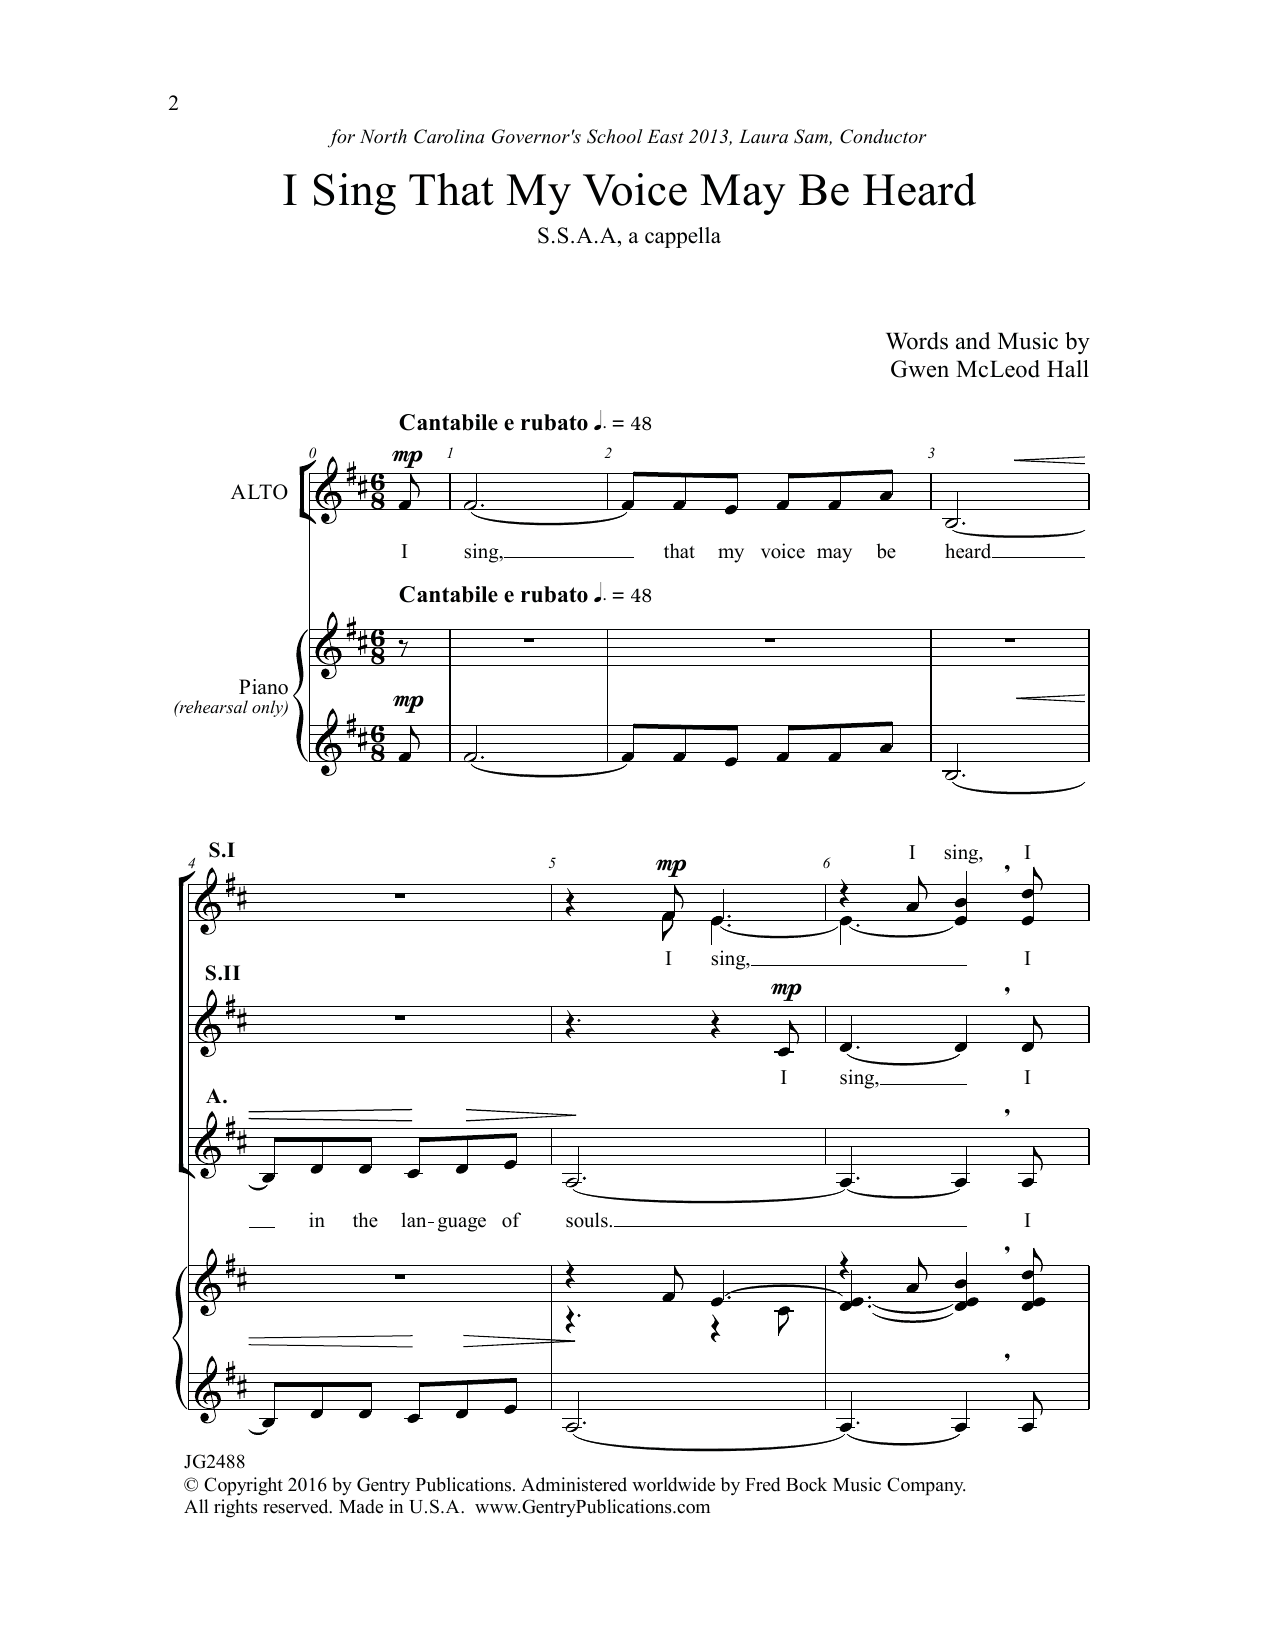 I Sing that My Voice May be Heard sheet music